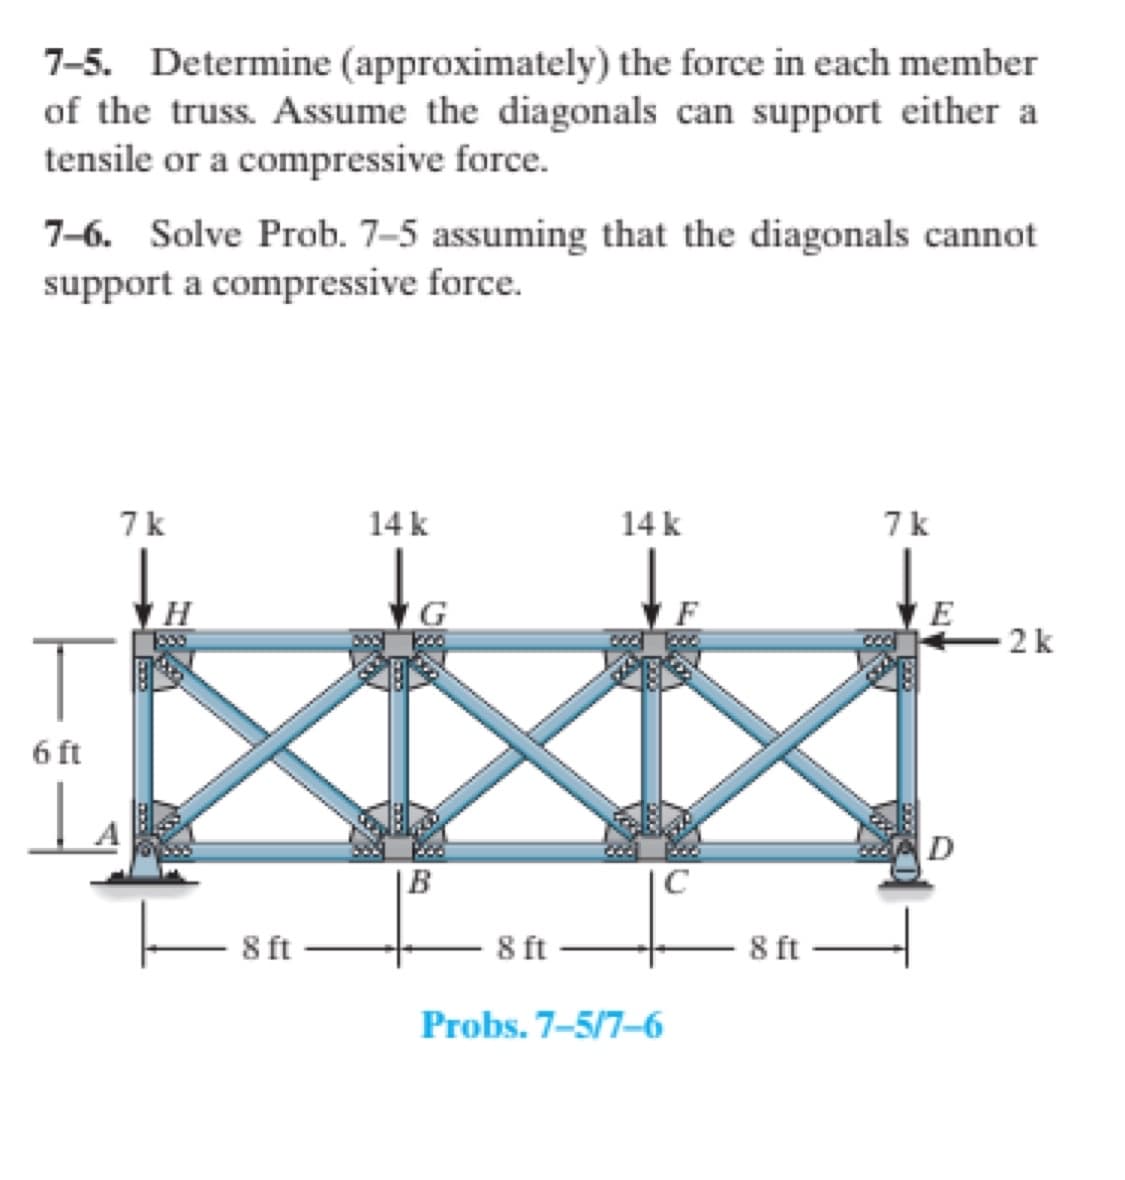 7-5. Determine (approximately) the force in each member
of the truss. Assume the diagonals can support either a
tensile or a compressive force.
7-6. Solve Prob. 7-5 assuming that the diagonals cannot
support a compressive force.
7k
14 k
14 k
7k
E
2k
6 ft
D
C
8 ft
8 ft
8 ft
Probs. 7-5/7-6
